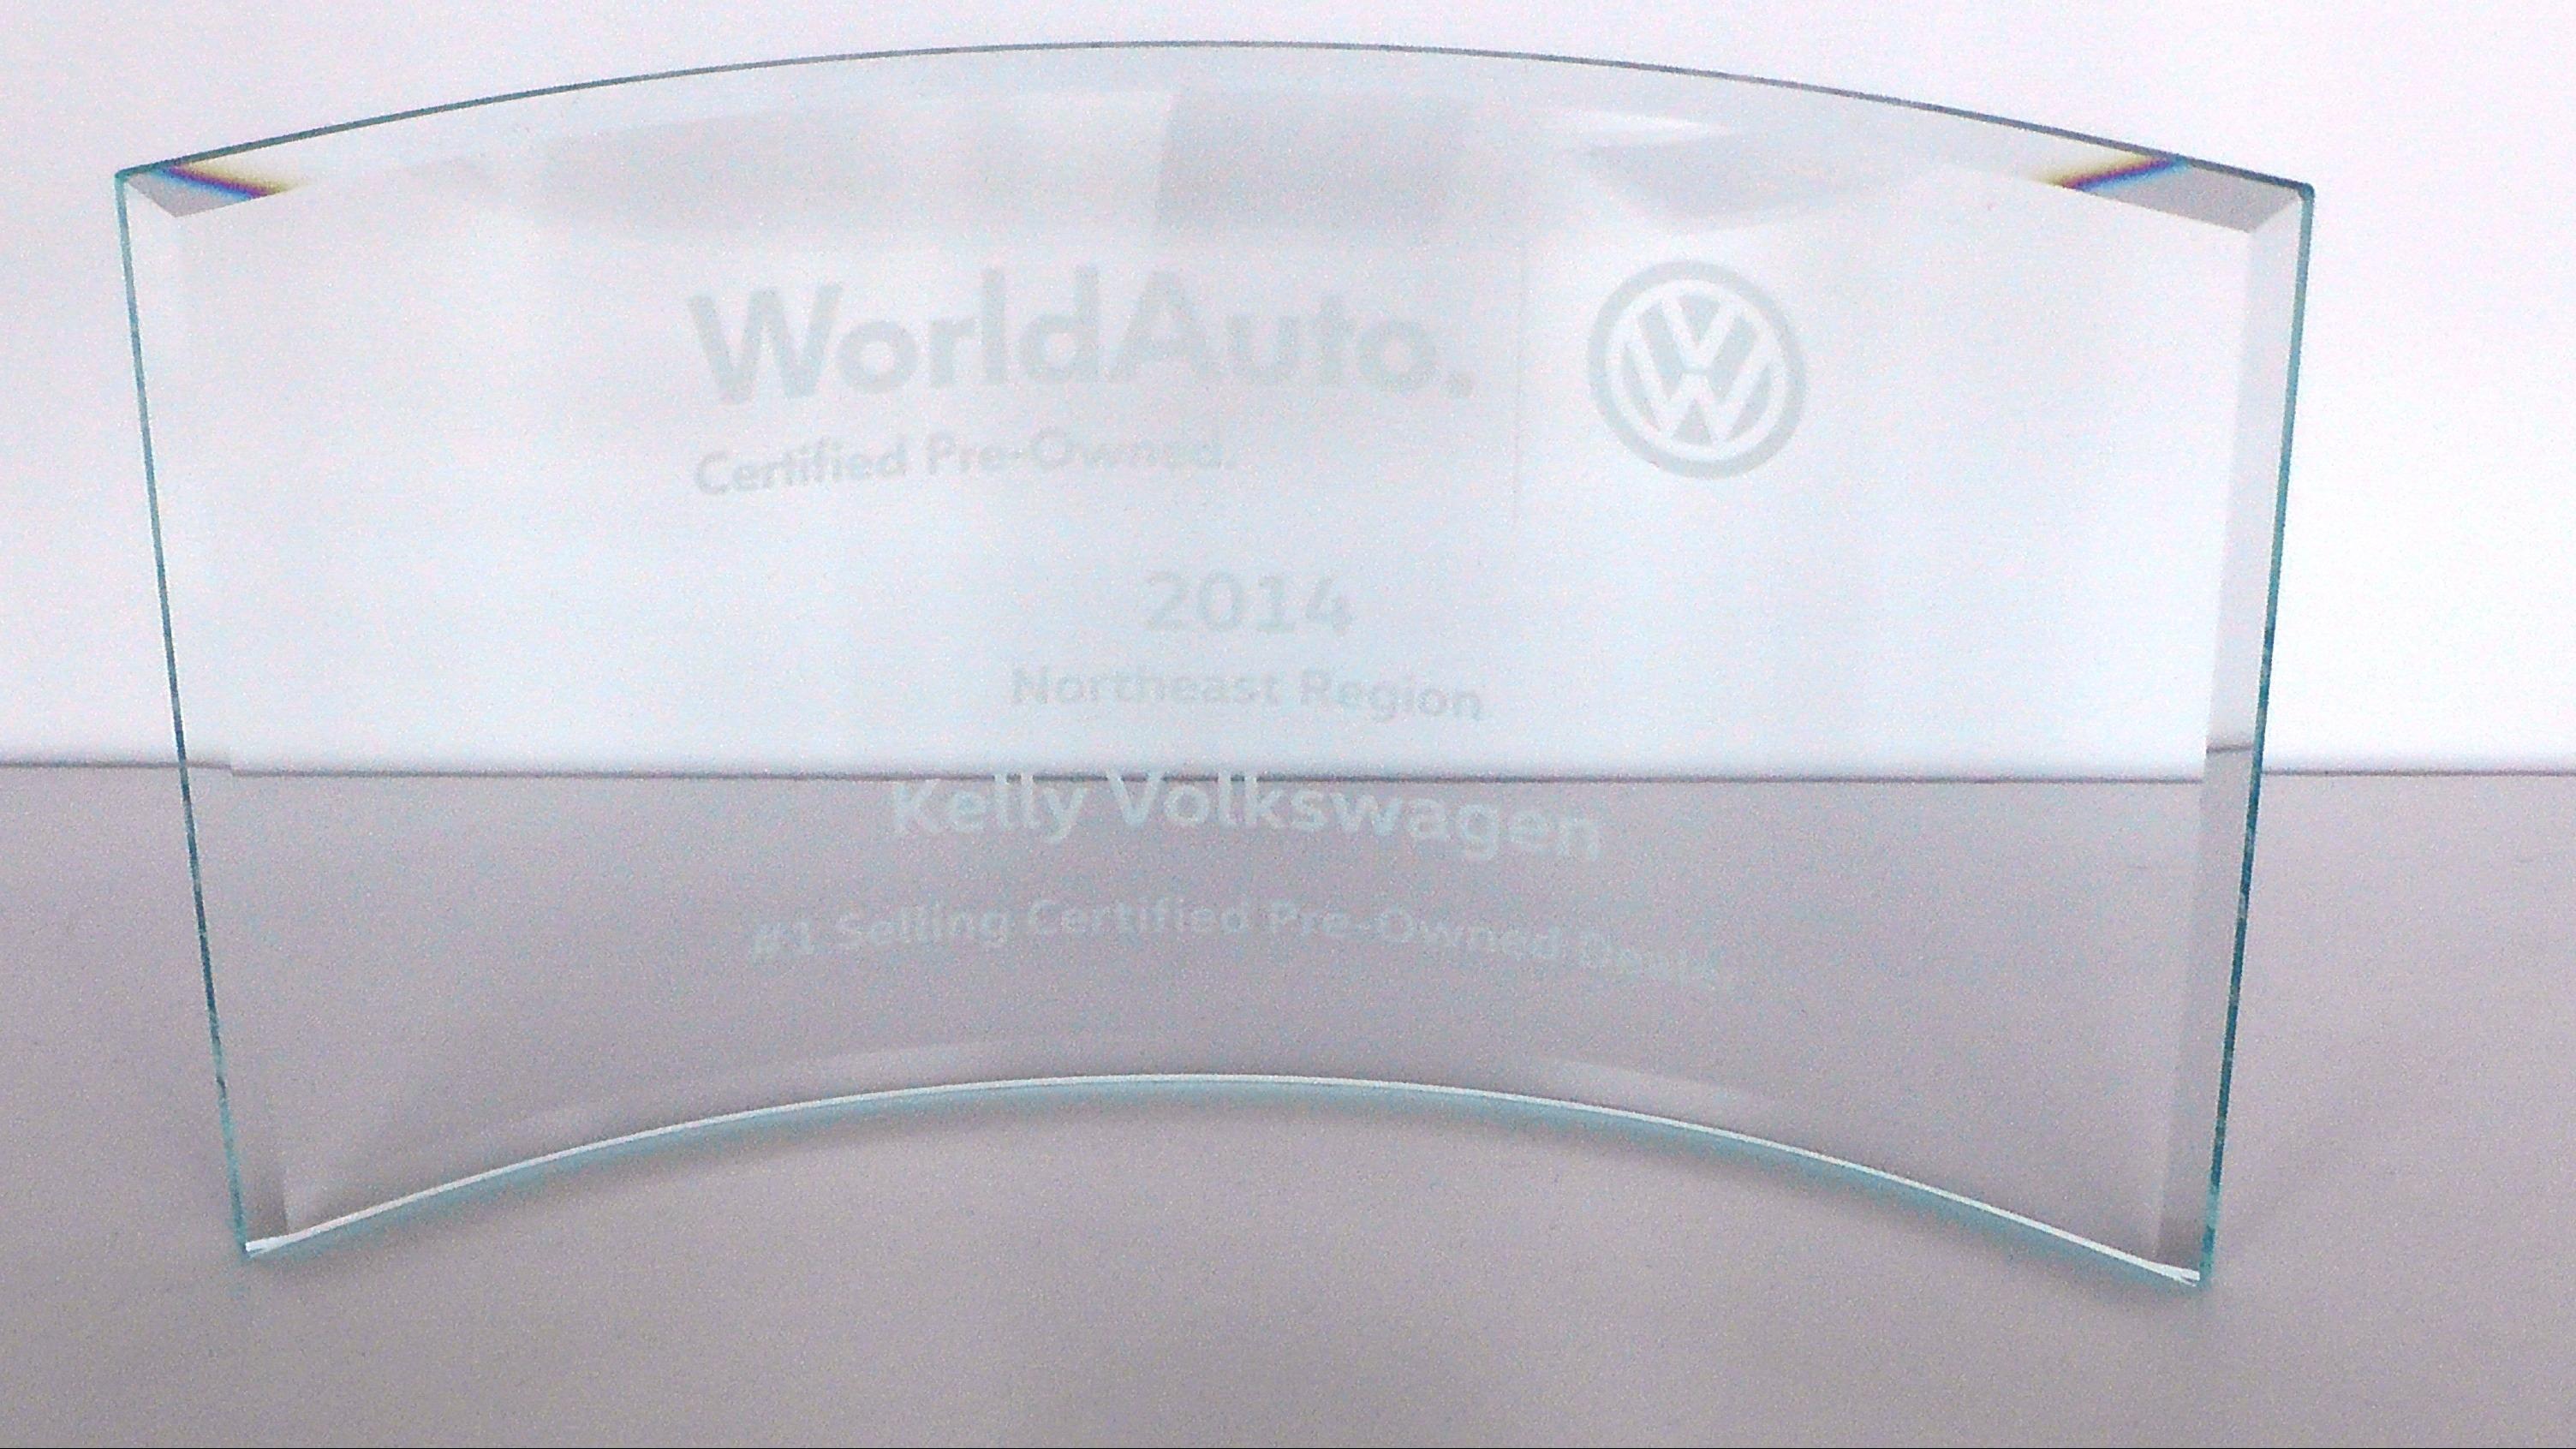 We were honored as a top certified pre-owned dealership in 2014 and it's something we take very seriously. We'd like to thank all of our pre-owned customers who made this achievement possible.